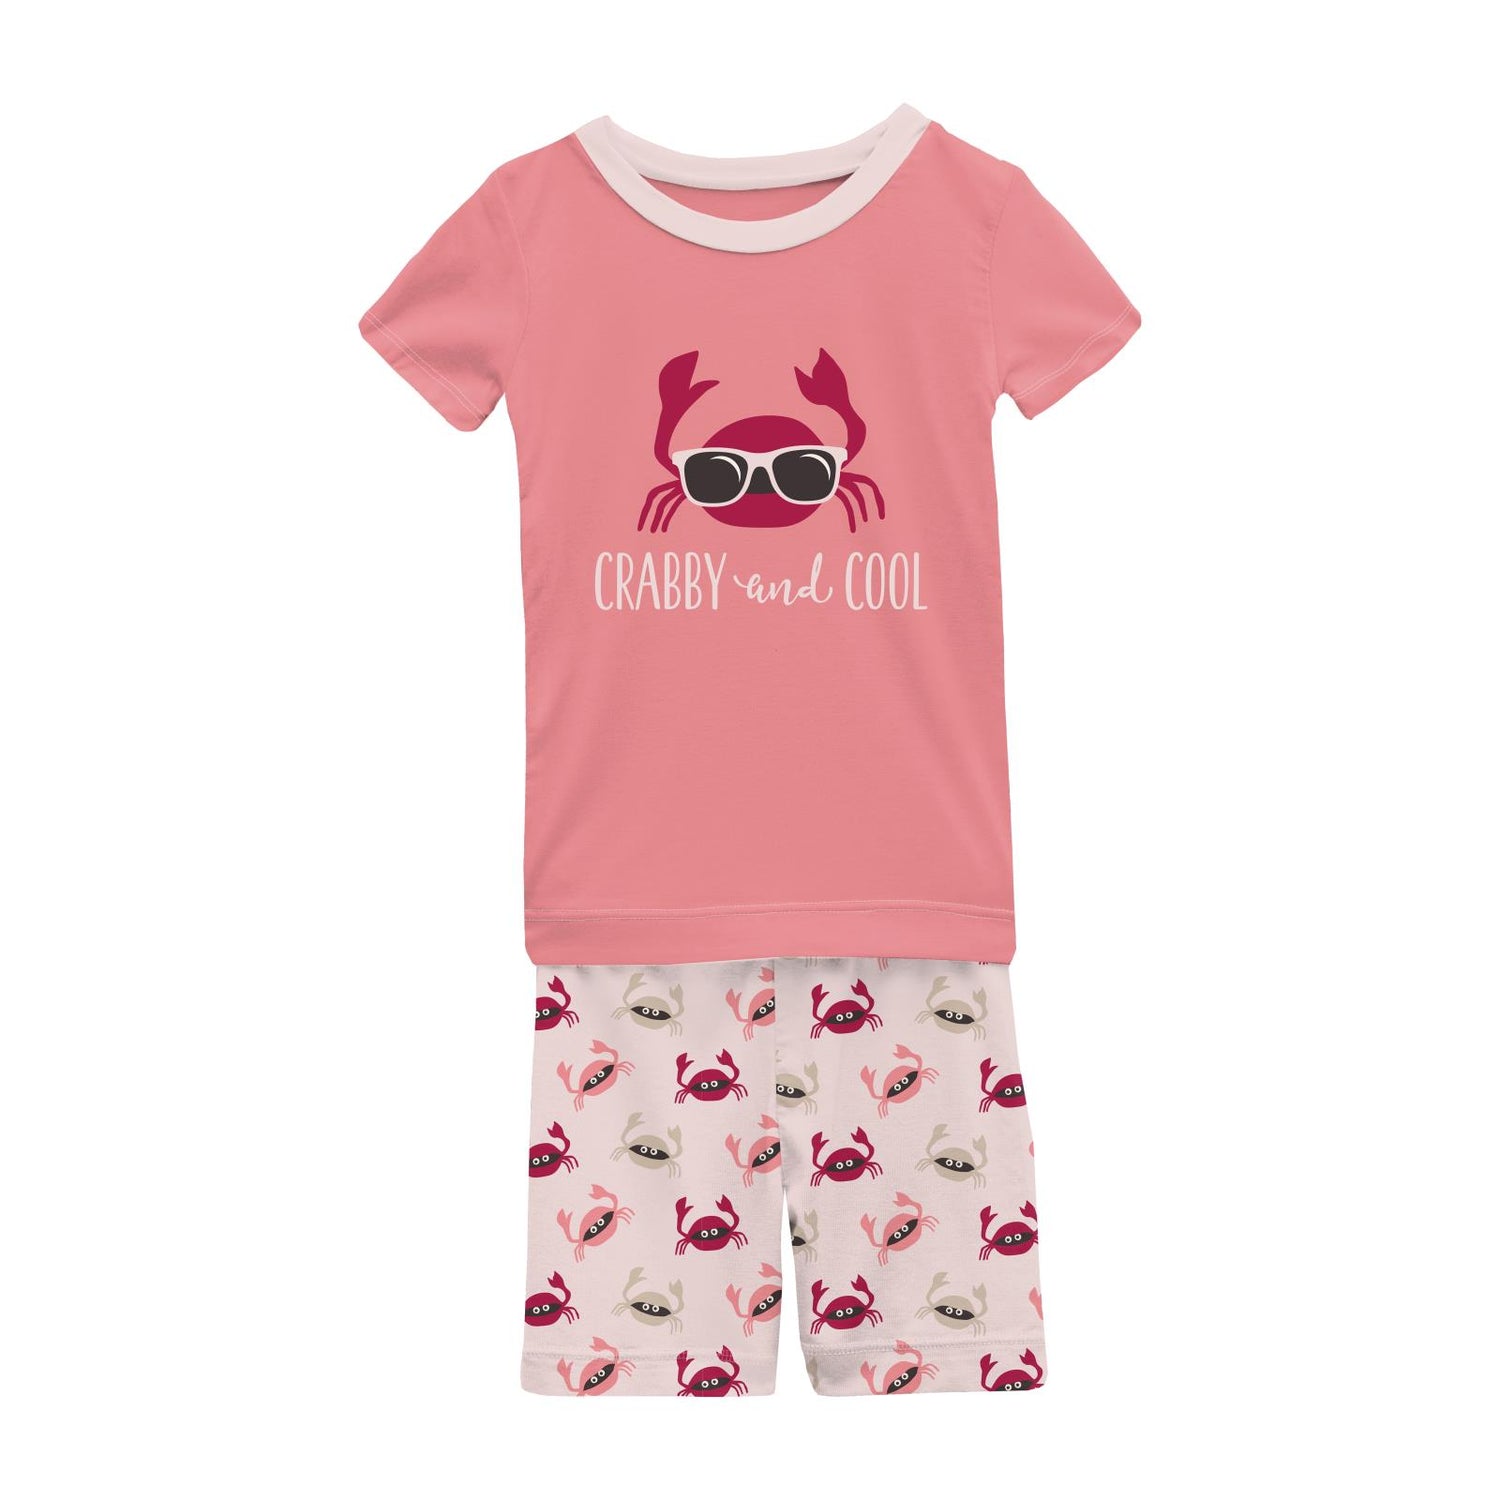 Short Sleeve Graphic Tee Pajama Set with Shorts in Macaroon Crabs